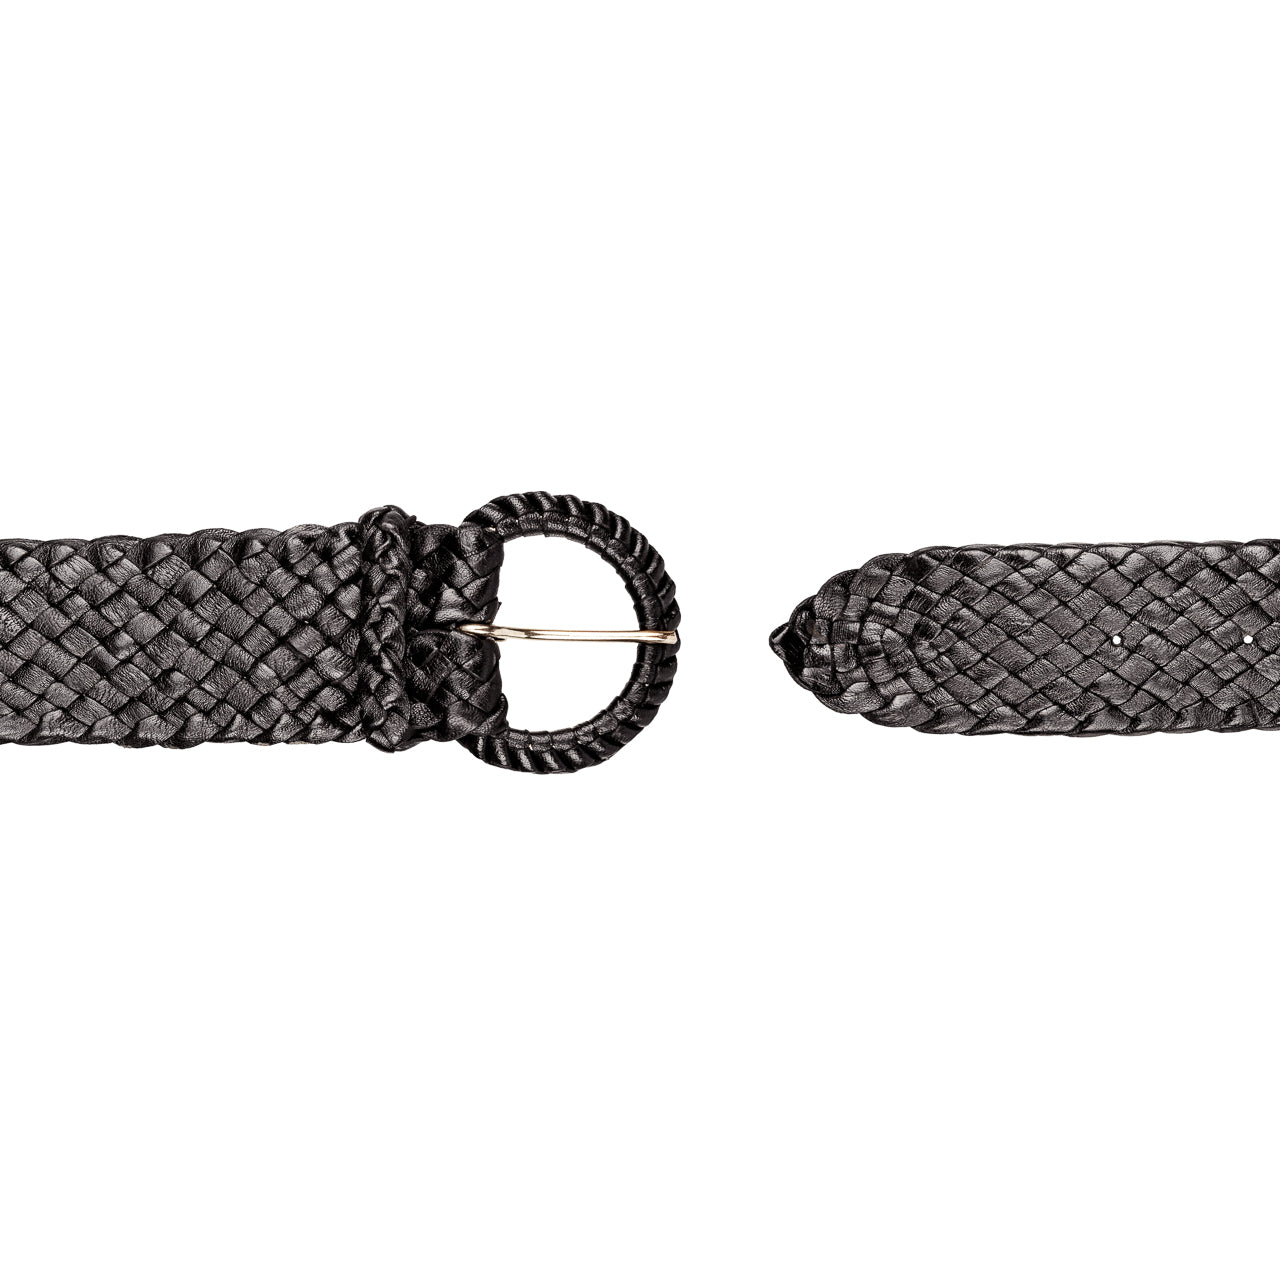 Black Ladies Waratah belt, 43mm wide, statement piece. 12 strands of Kangaroo Leather in Brisbane. Perfect for jeans, durable for any occasion. Available Black, Tan.